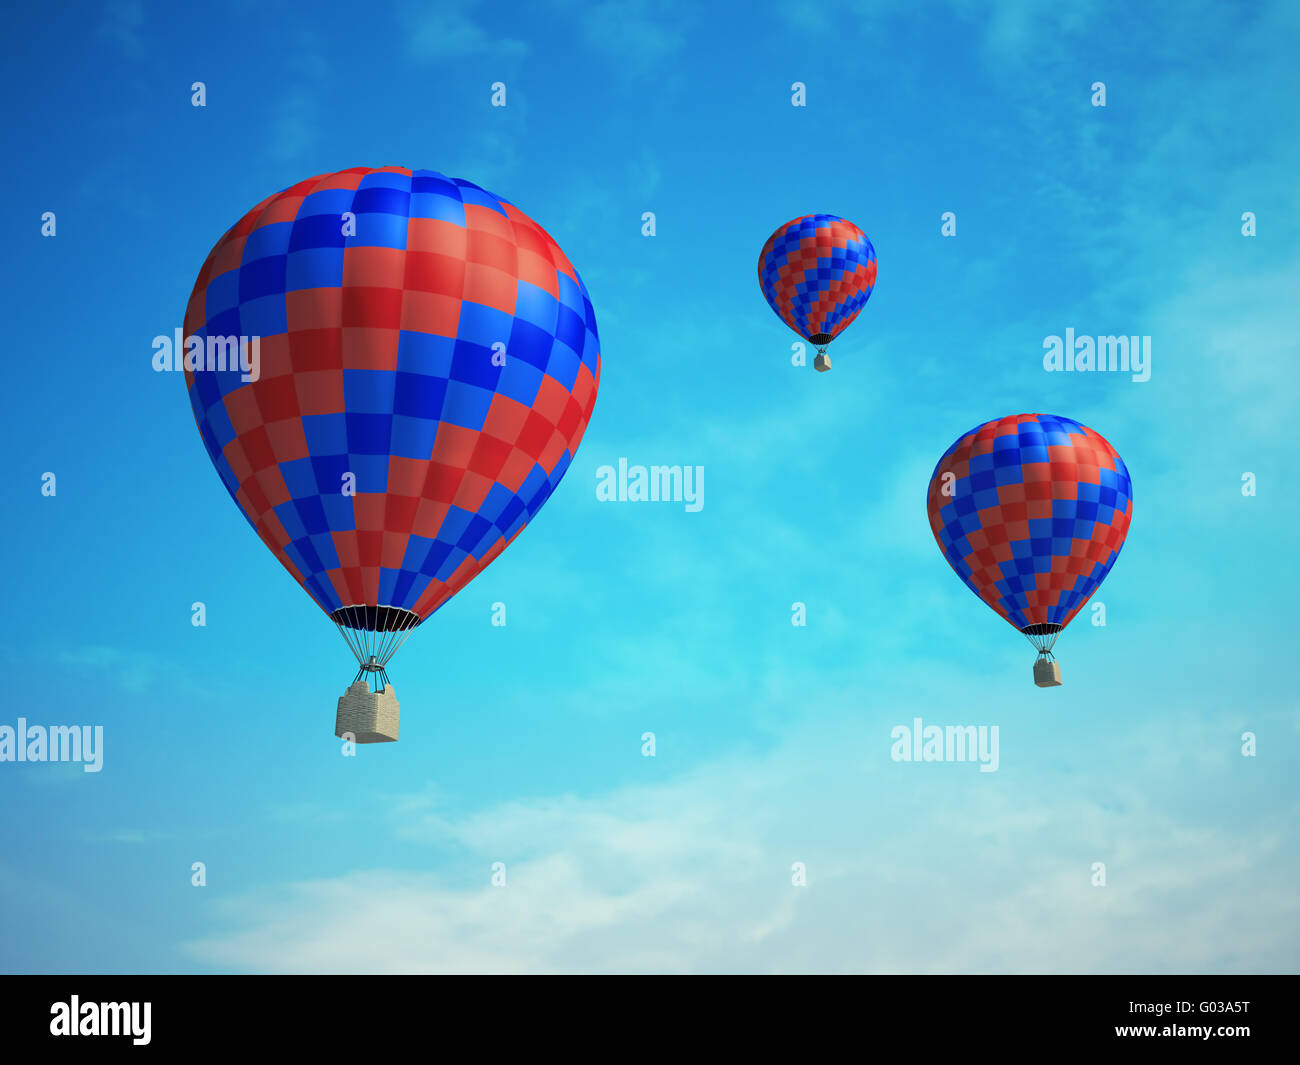 Three colorful balloons on a blue sky background Stock Photo